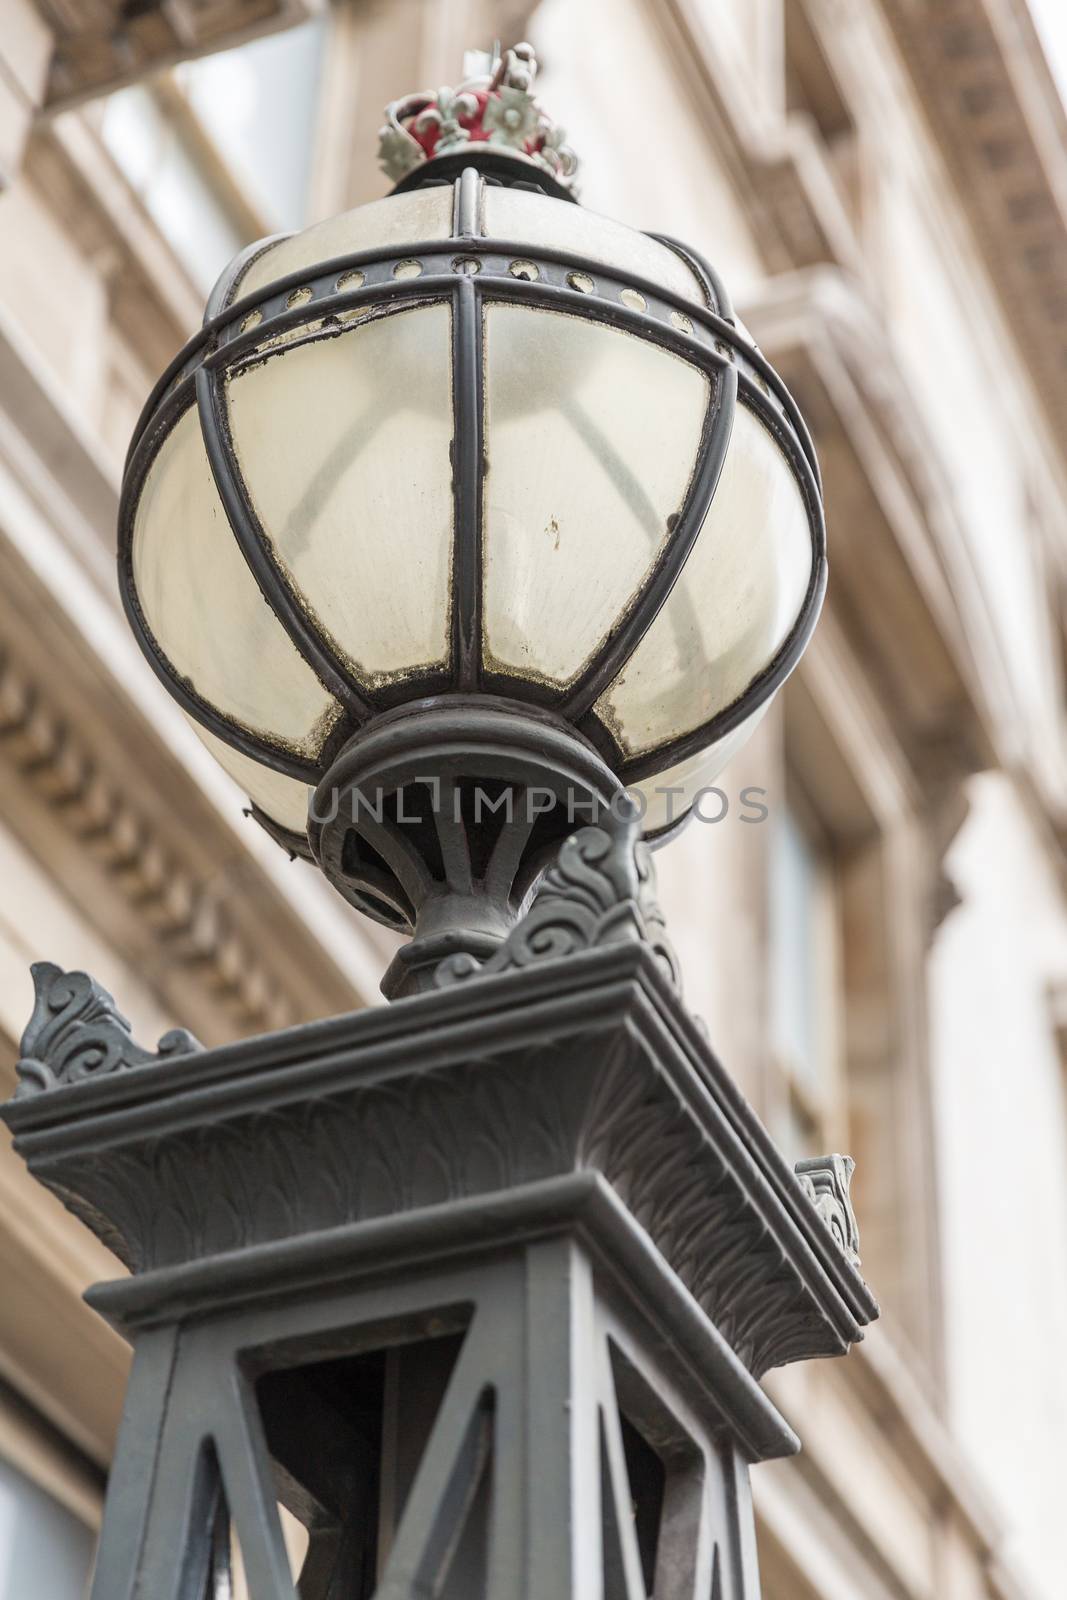 Original Gas Lamp in London, adapted to electric